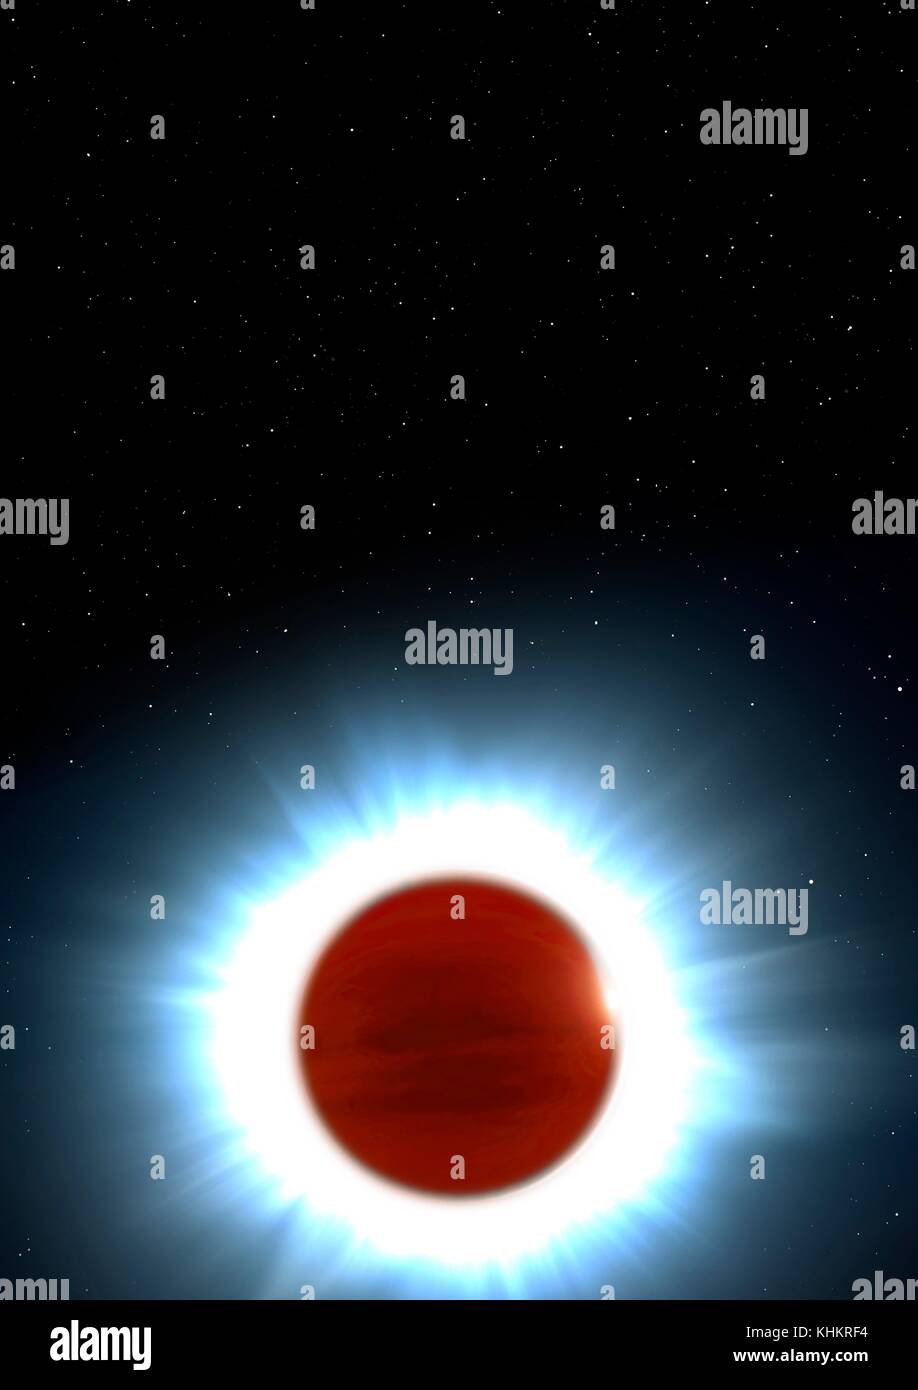 Illustration of the hottest known exoplanet,Kelt-9b.Kelt-9 is an A-type star with a temperature almost twice that of the Sun.Astronomers have found an extrasolar planet orbiting this star at such close proximity that it completes an orbit in a mere 36 hours.This means that the planet is hotter,at around 4600 Kelvin,than the majority of stars.The relentless radiation from the star is evaporating the planet at a phenomenal rate.Ten billion grams of matter are stripped away from the planet every second,forming a comet-like tail behind it. Stock Photo